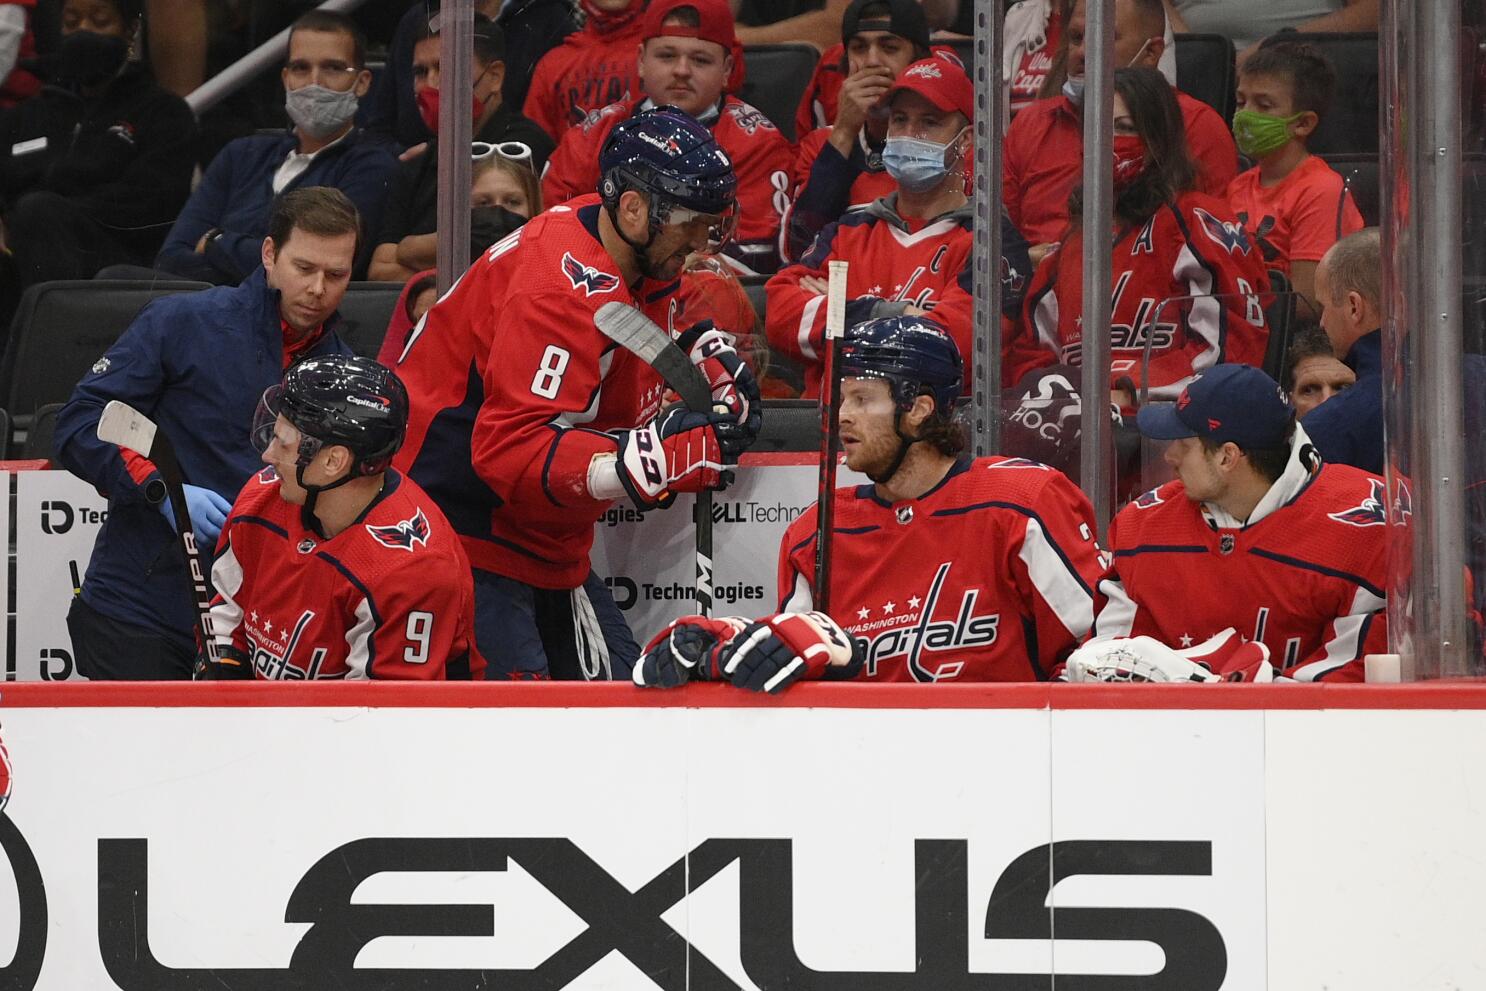 Alex Ovechkin sees effect on Capitals ahead of training camp